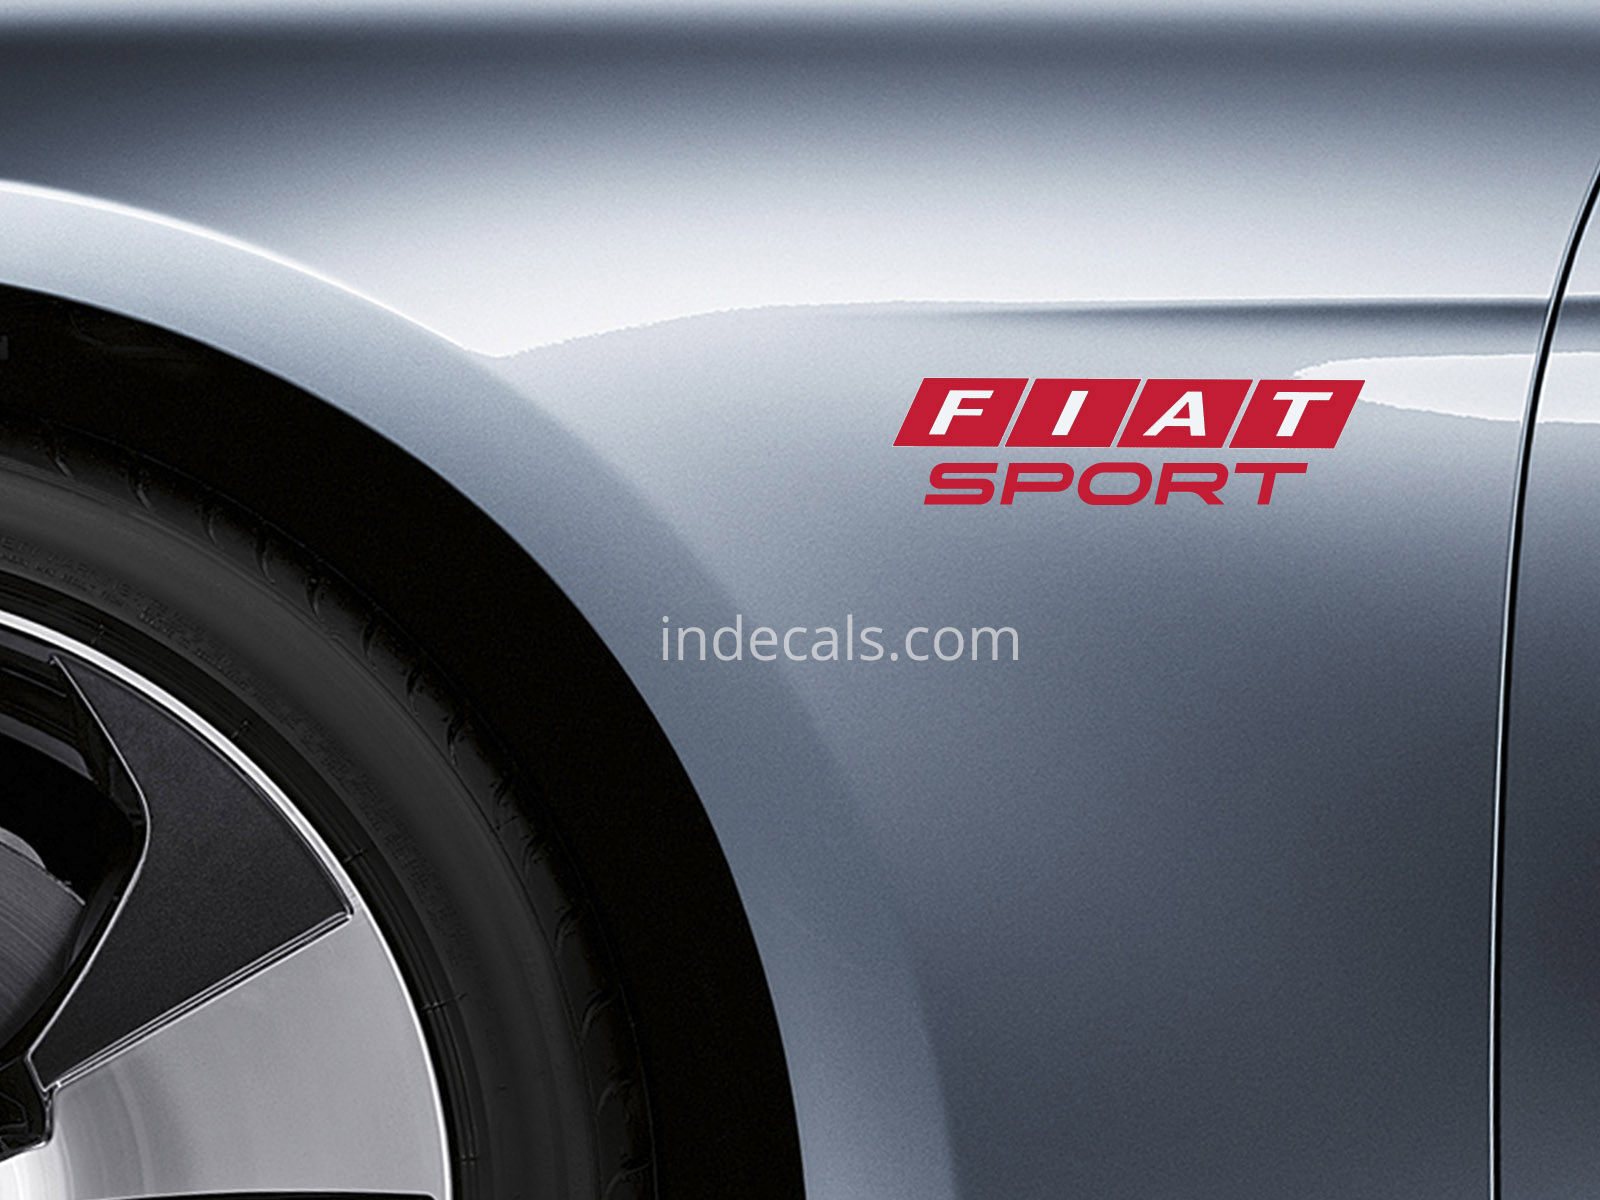 2 x Fiat Sports stickers for Wings - Red